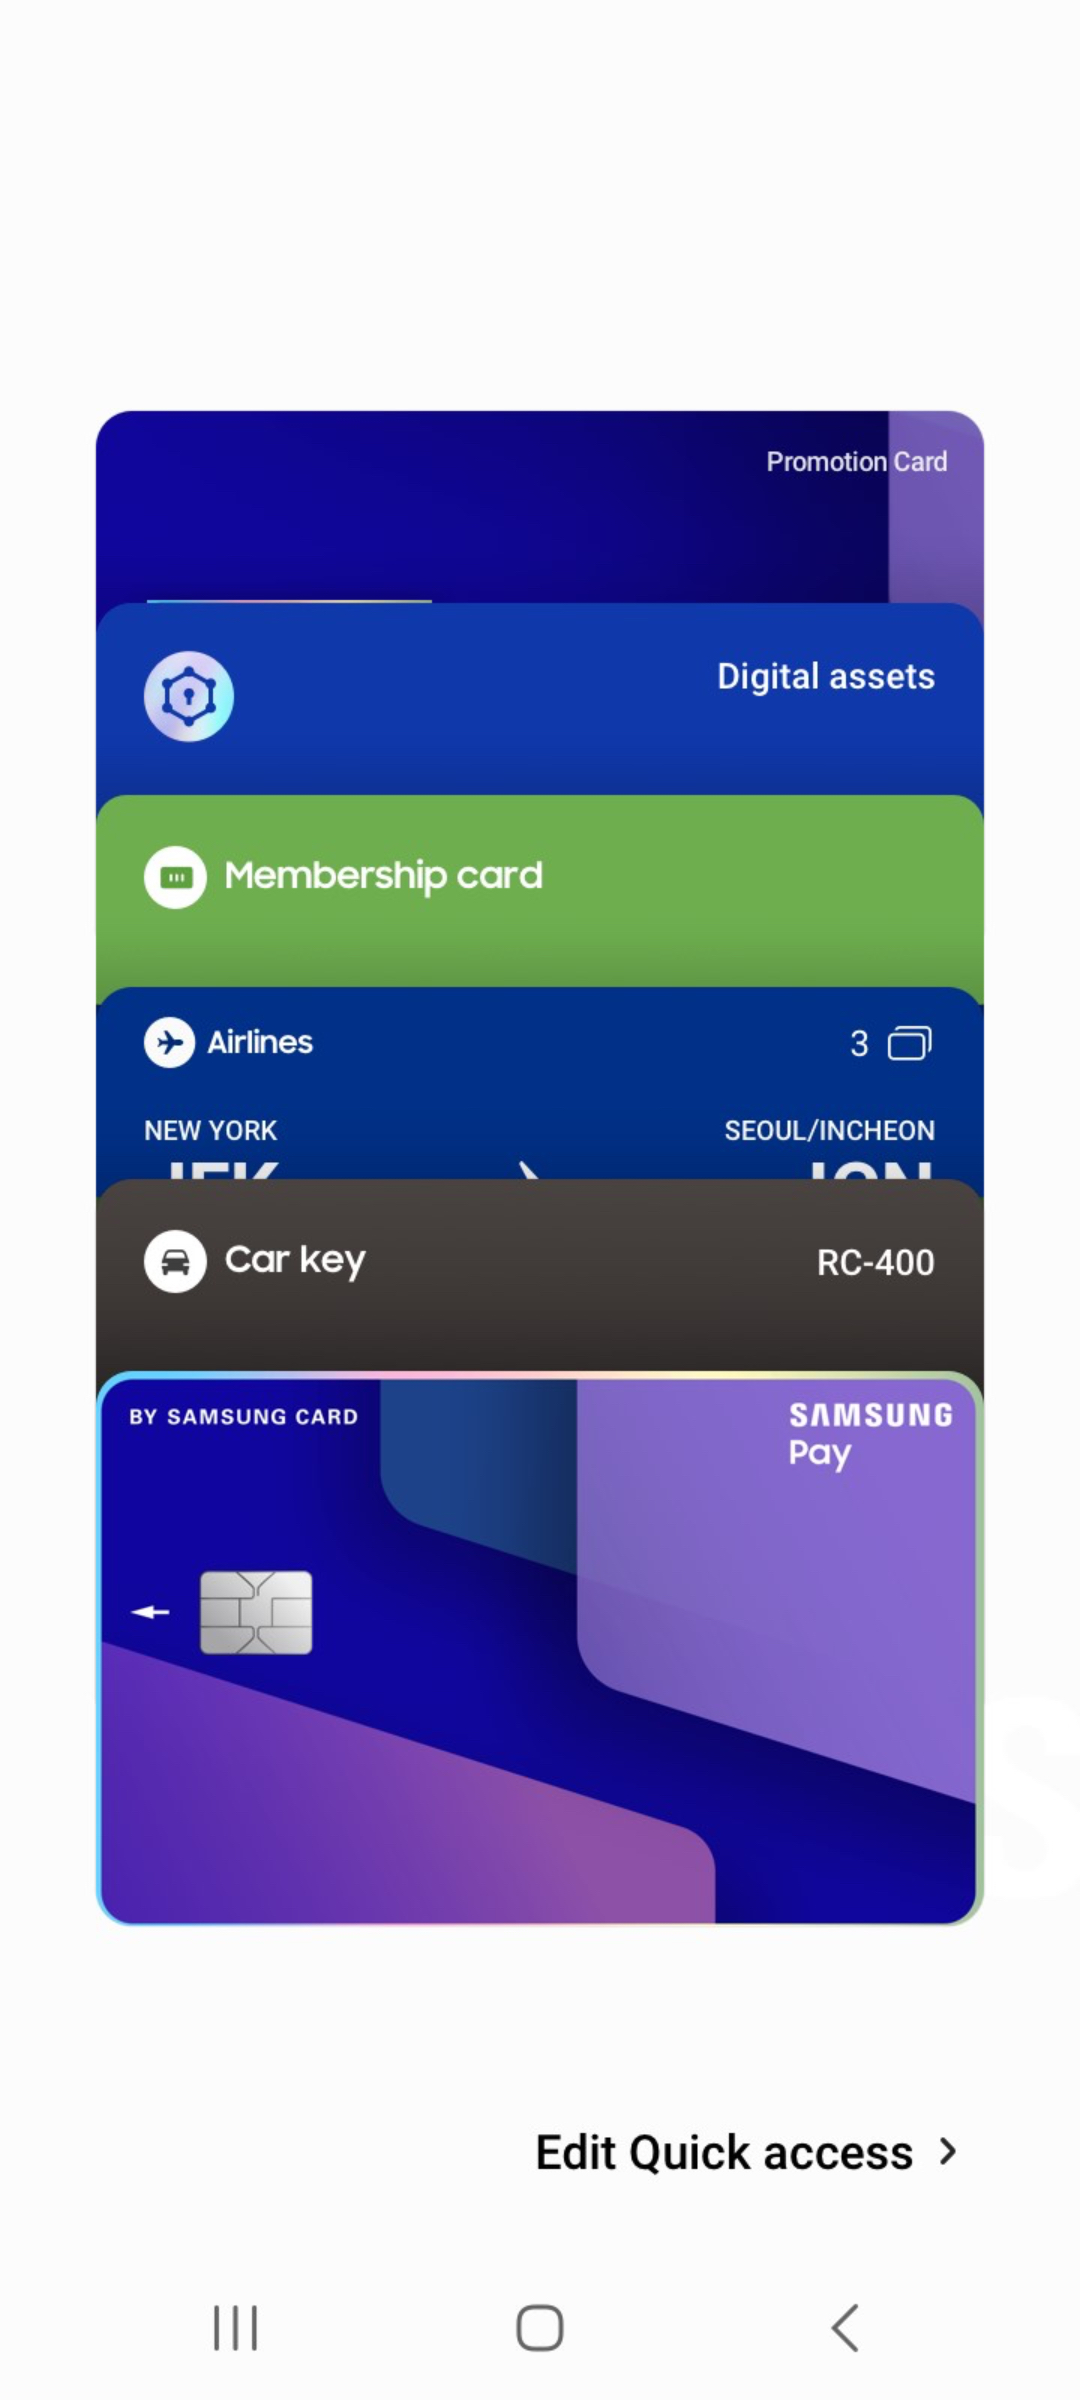 Samsung Wallet app is now available for download